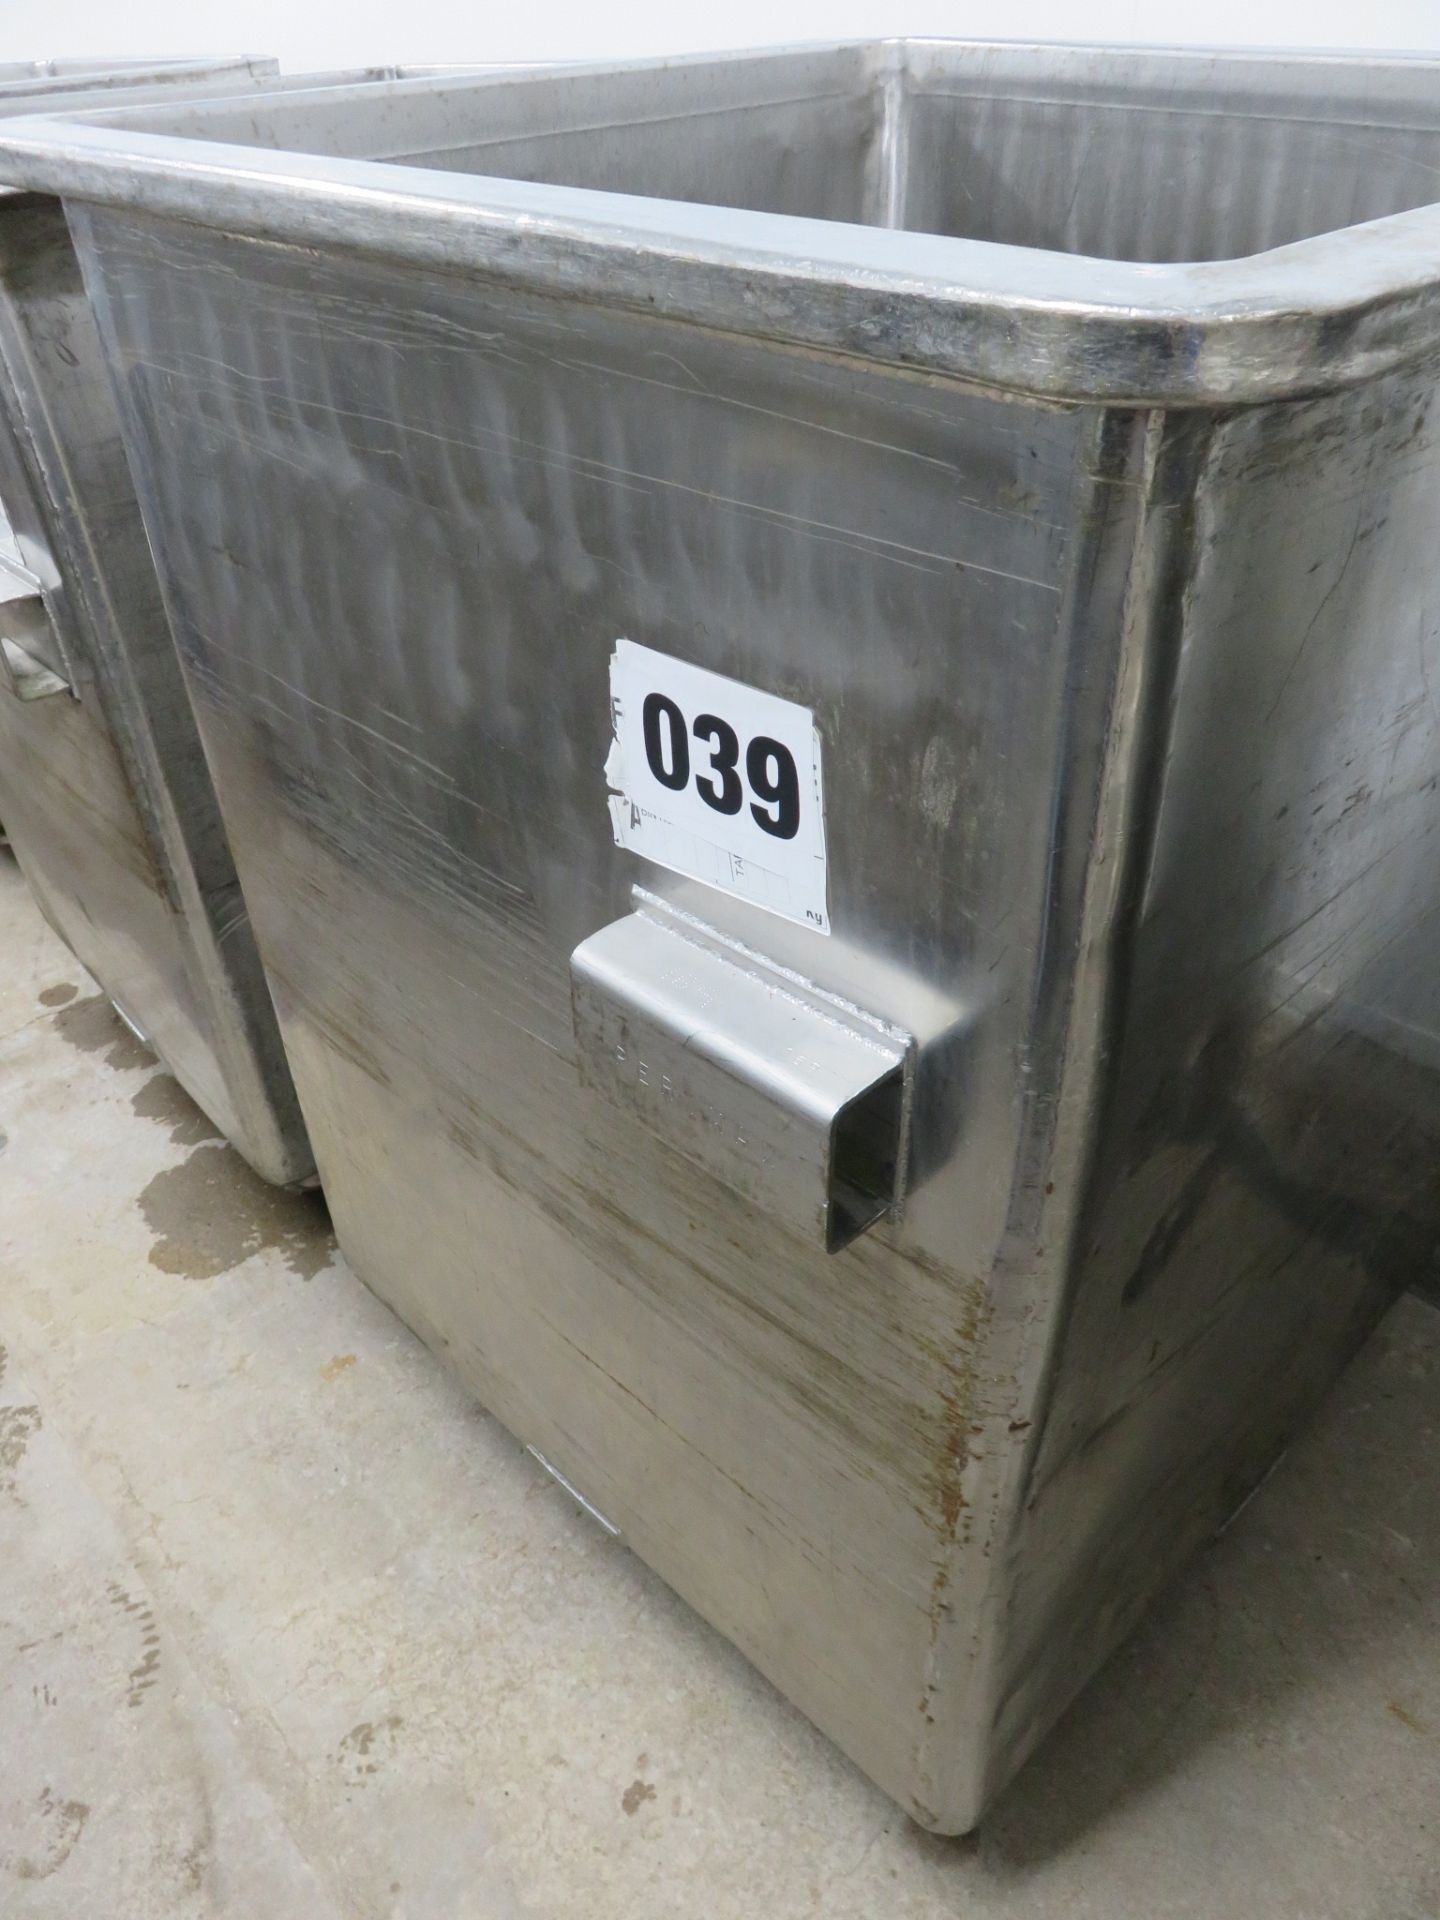 S/s Mobile Bins with bottom hole. Approx. internal 900mm x 900mm x 1150mm deep. Lift out £20